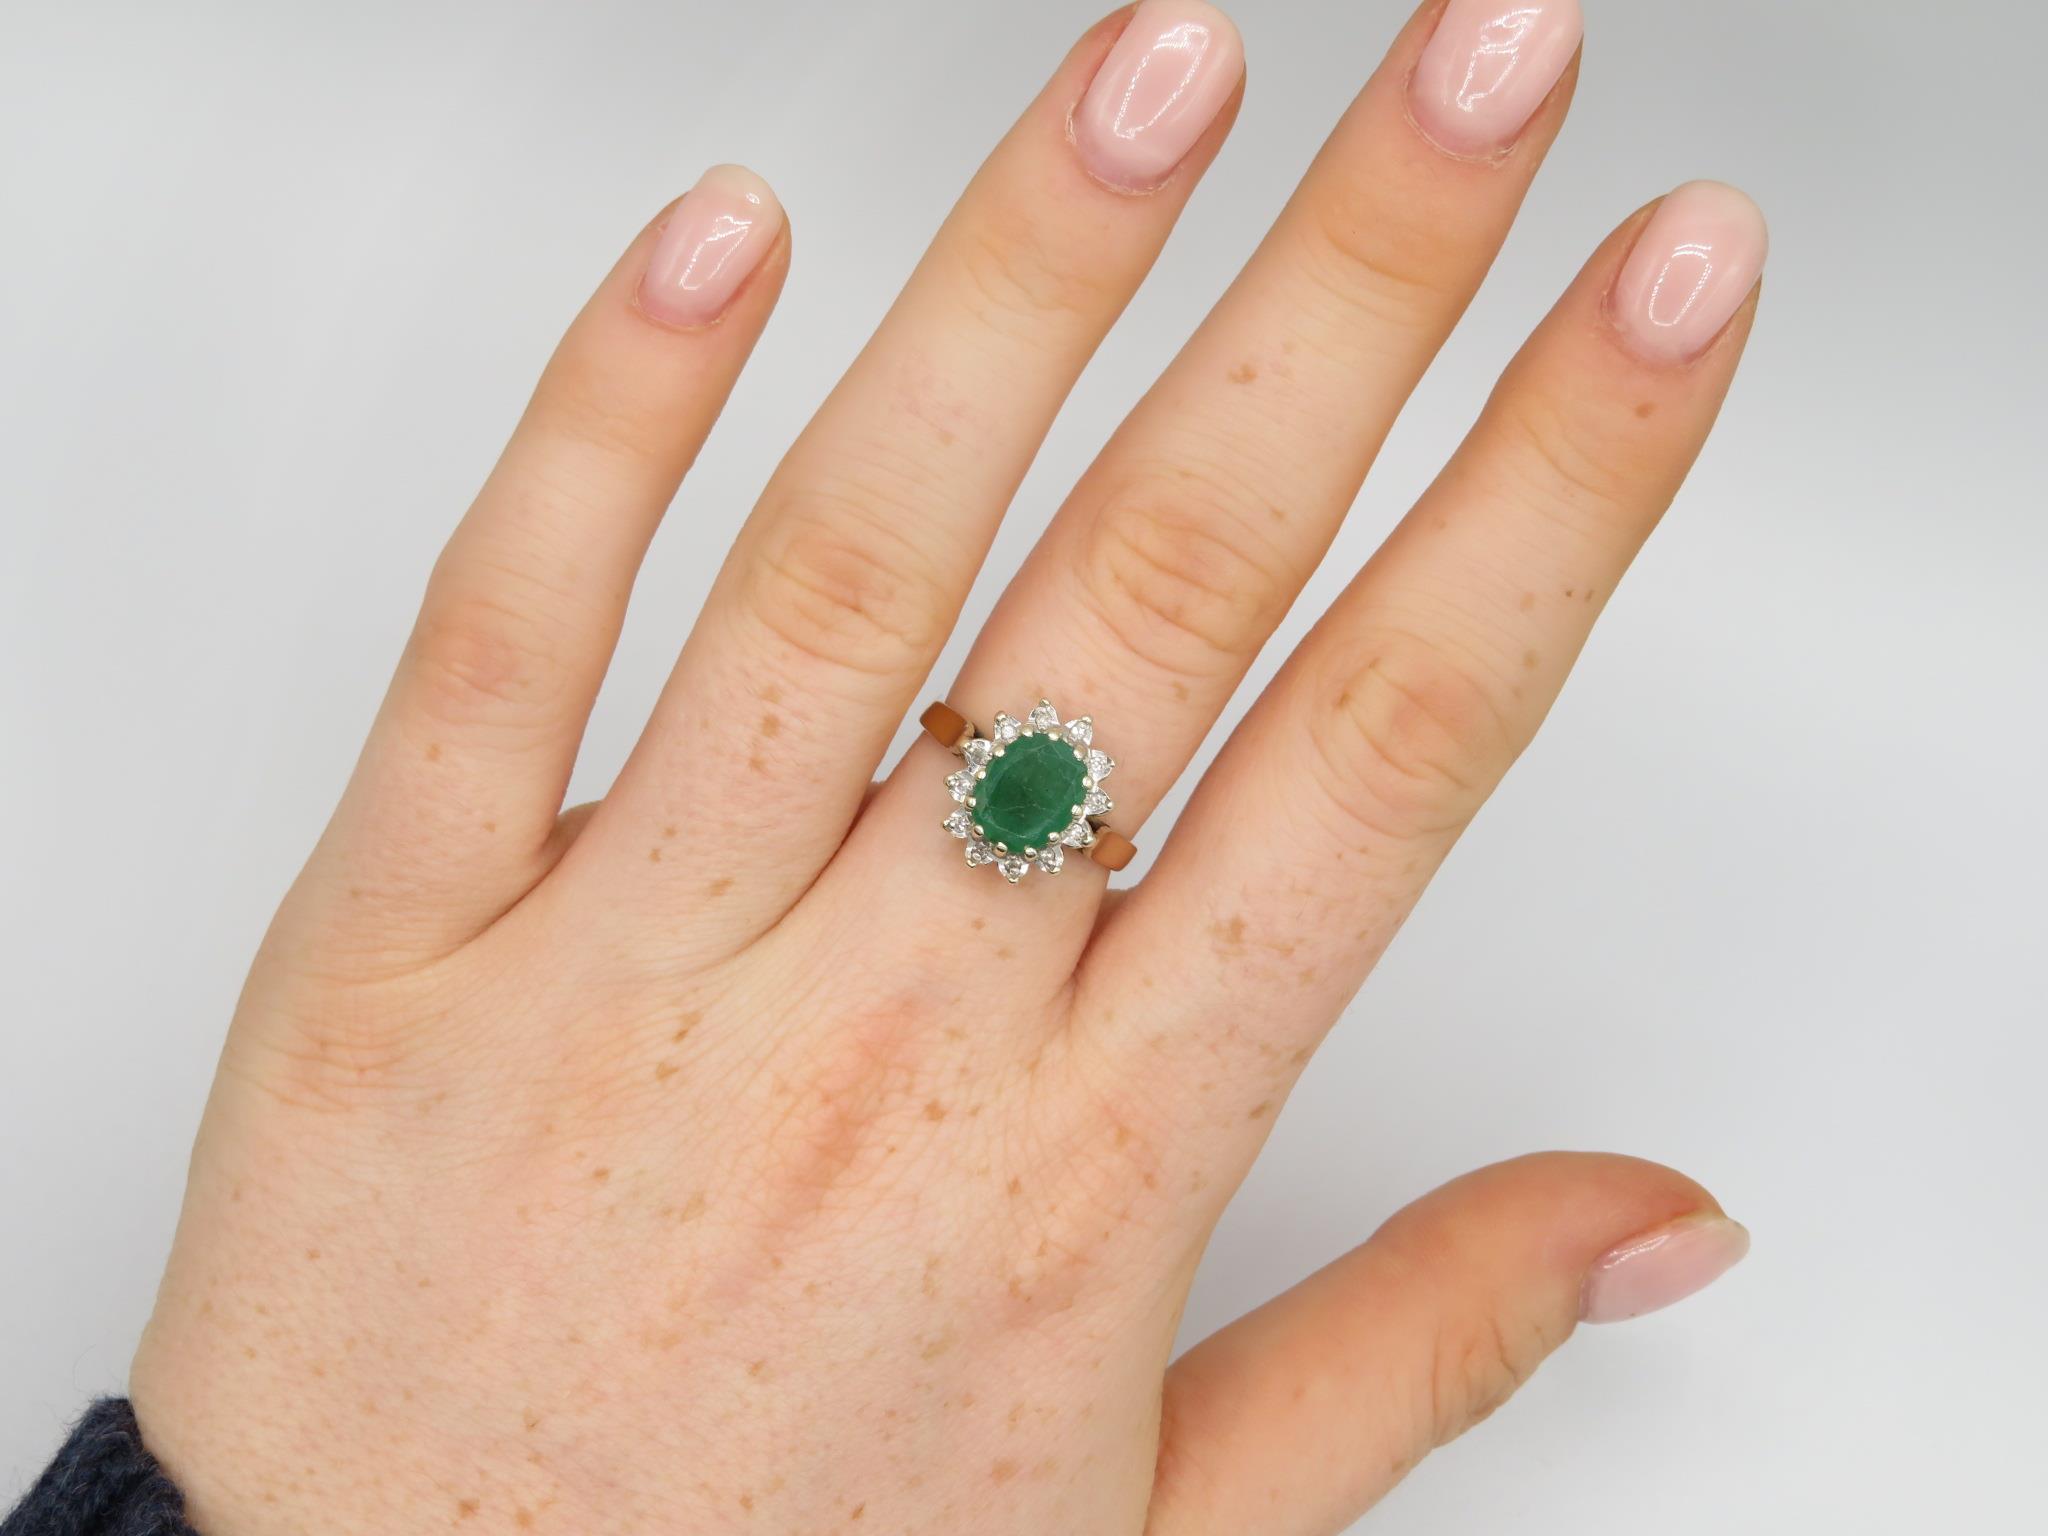 9ct Gold Oval Cut Emerald Single Stone Ring With Diamond Surround (3.2g) Size M - Image 7 of 8